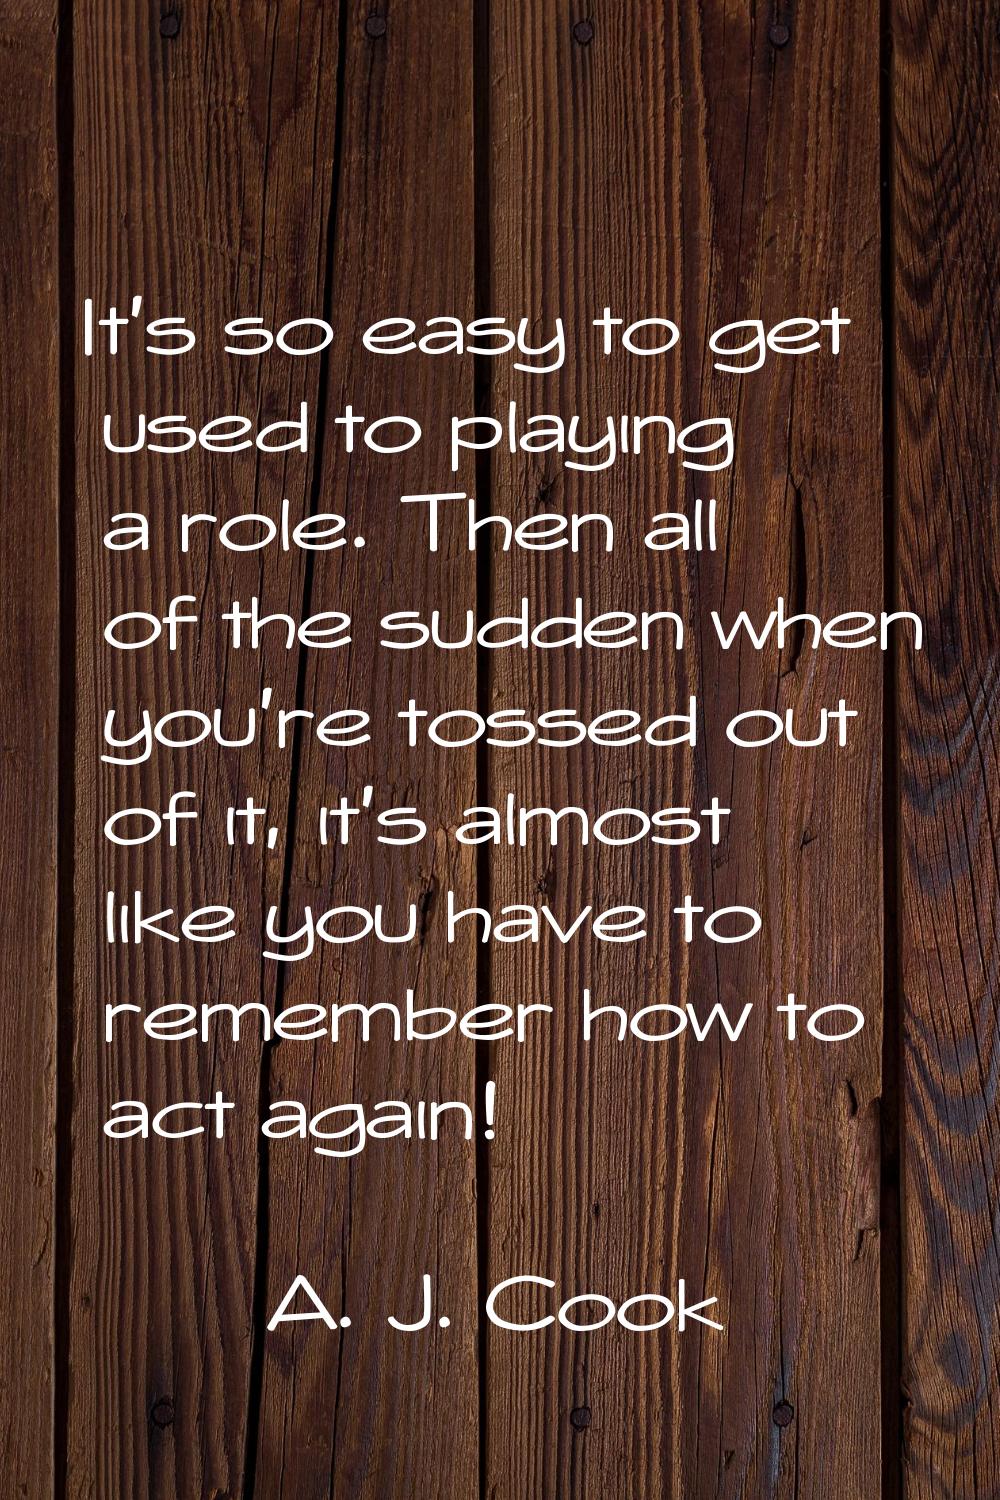 It's so easy to get used to playing a role. Then all of the sudden when you're tossed out of it, it